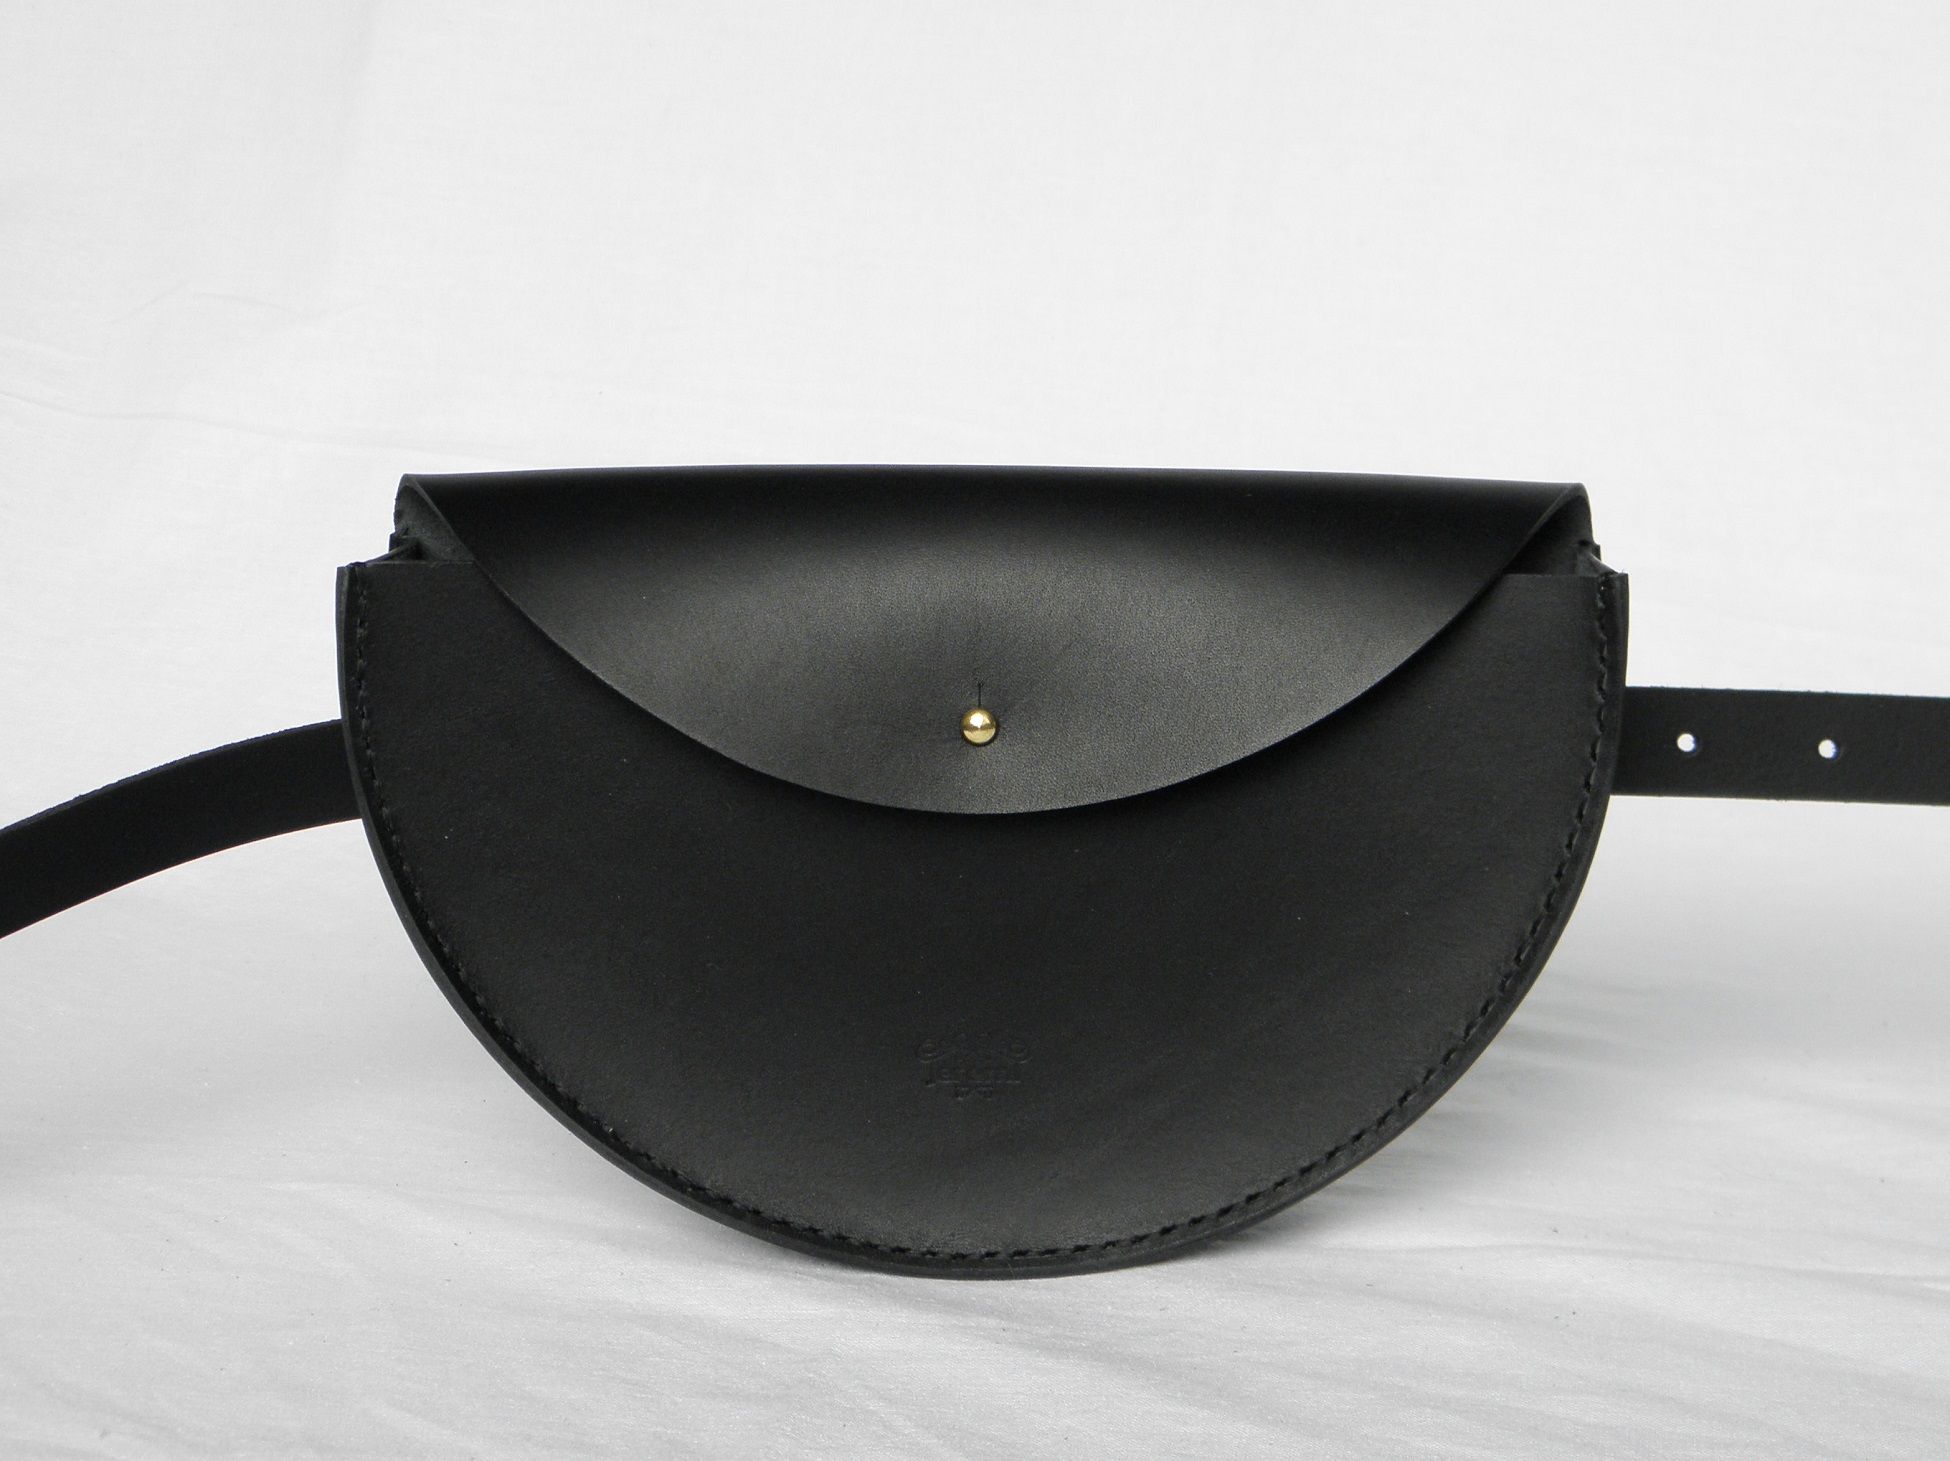 Hermès - Authenticated In-The-Loop Handbag - Leather Black Plain for Women, Never Worn